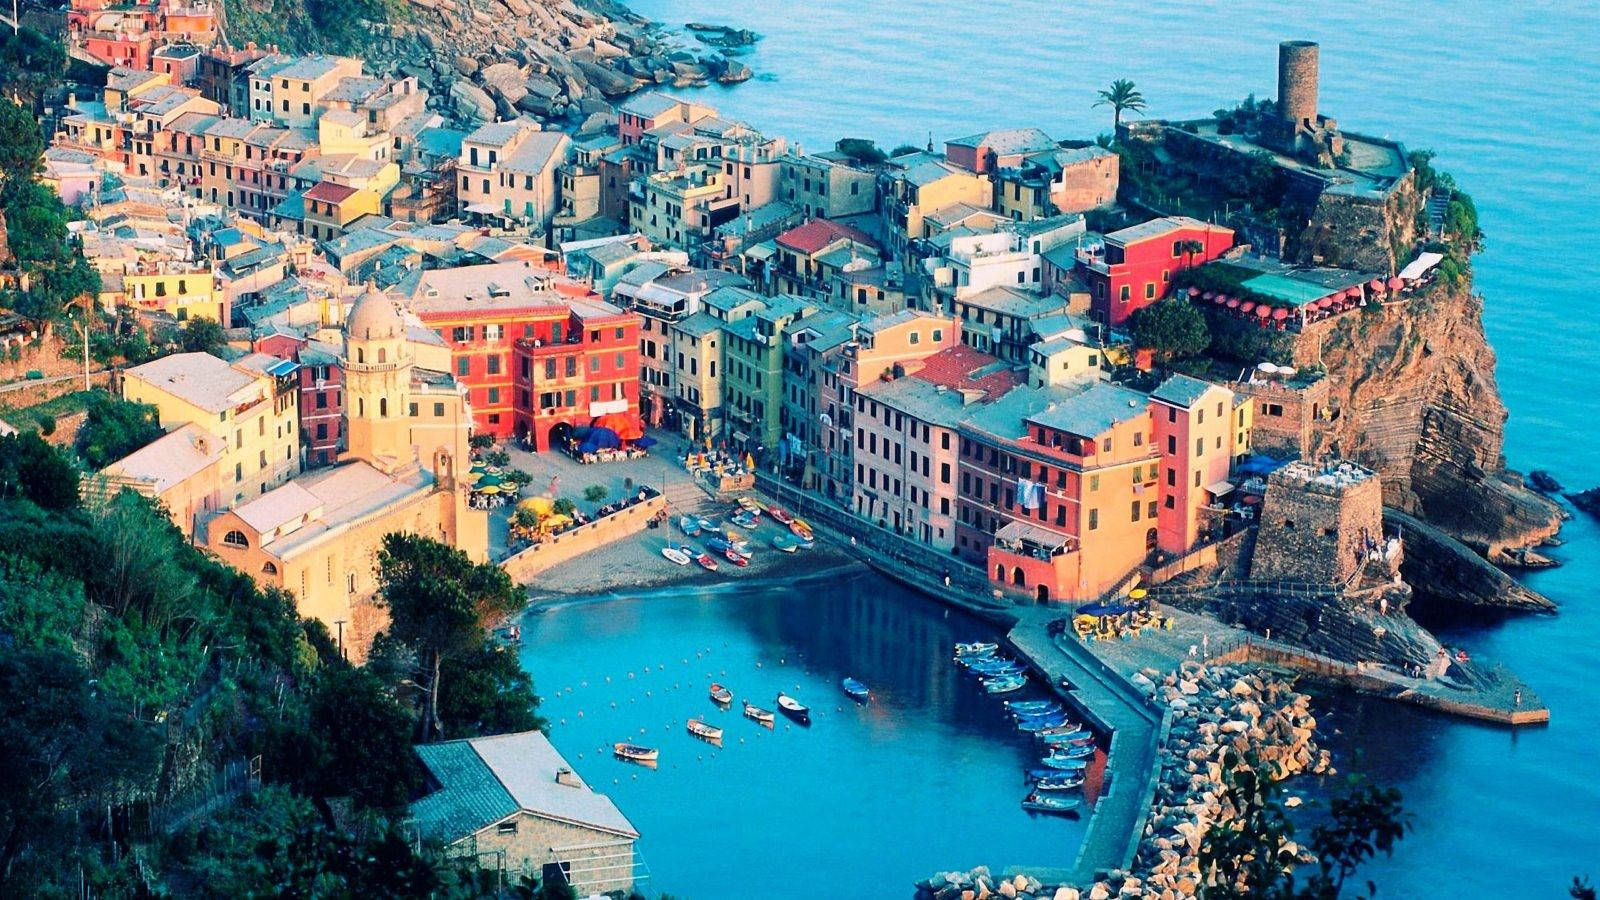 Capturing the mesmerizing views of Vernazza, Italy - travel postcard-perfect! Wallpaper